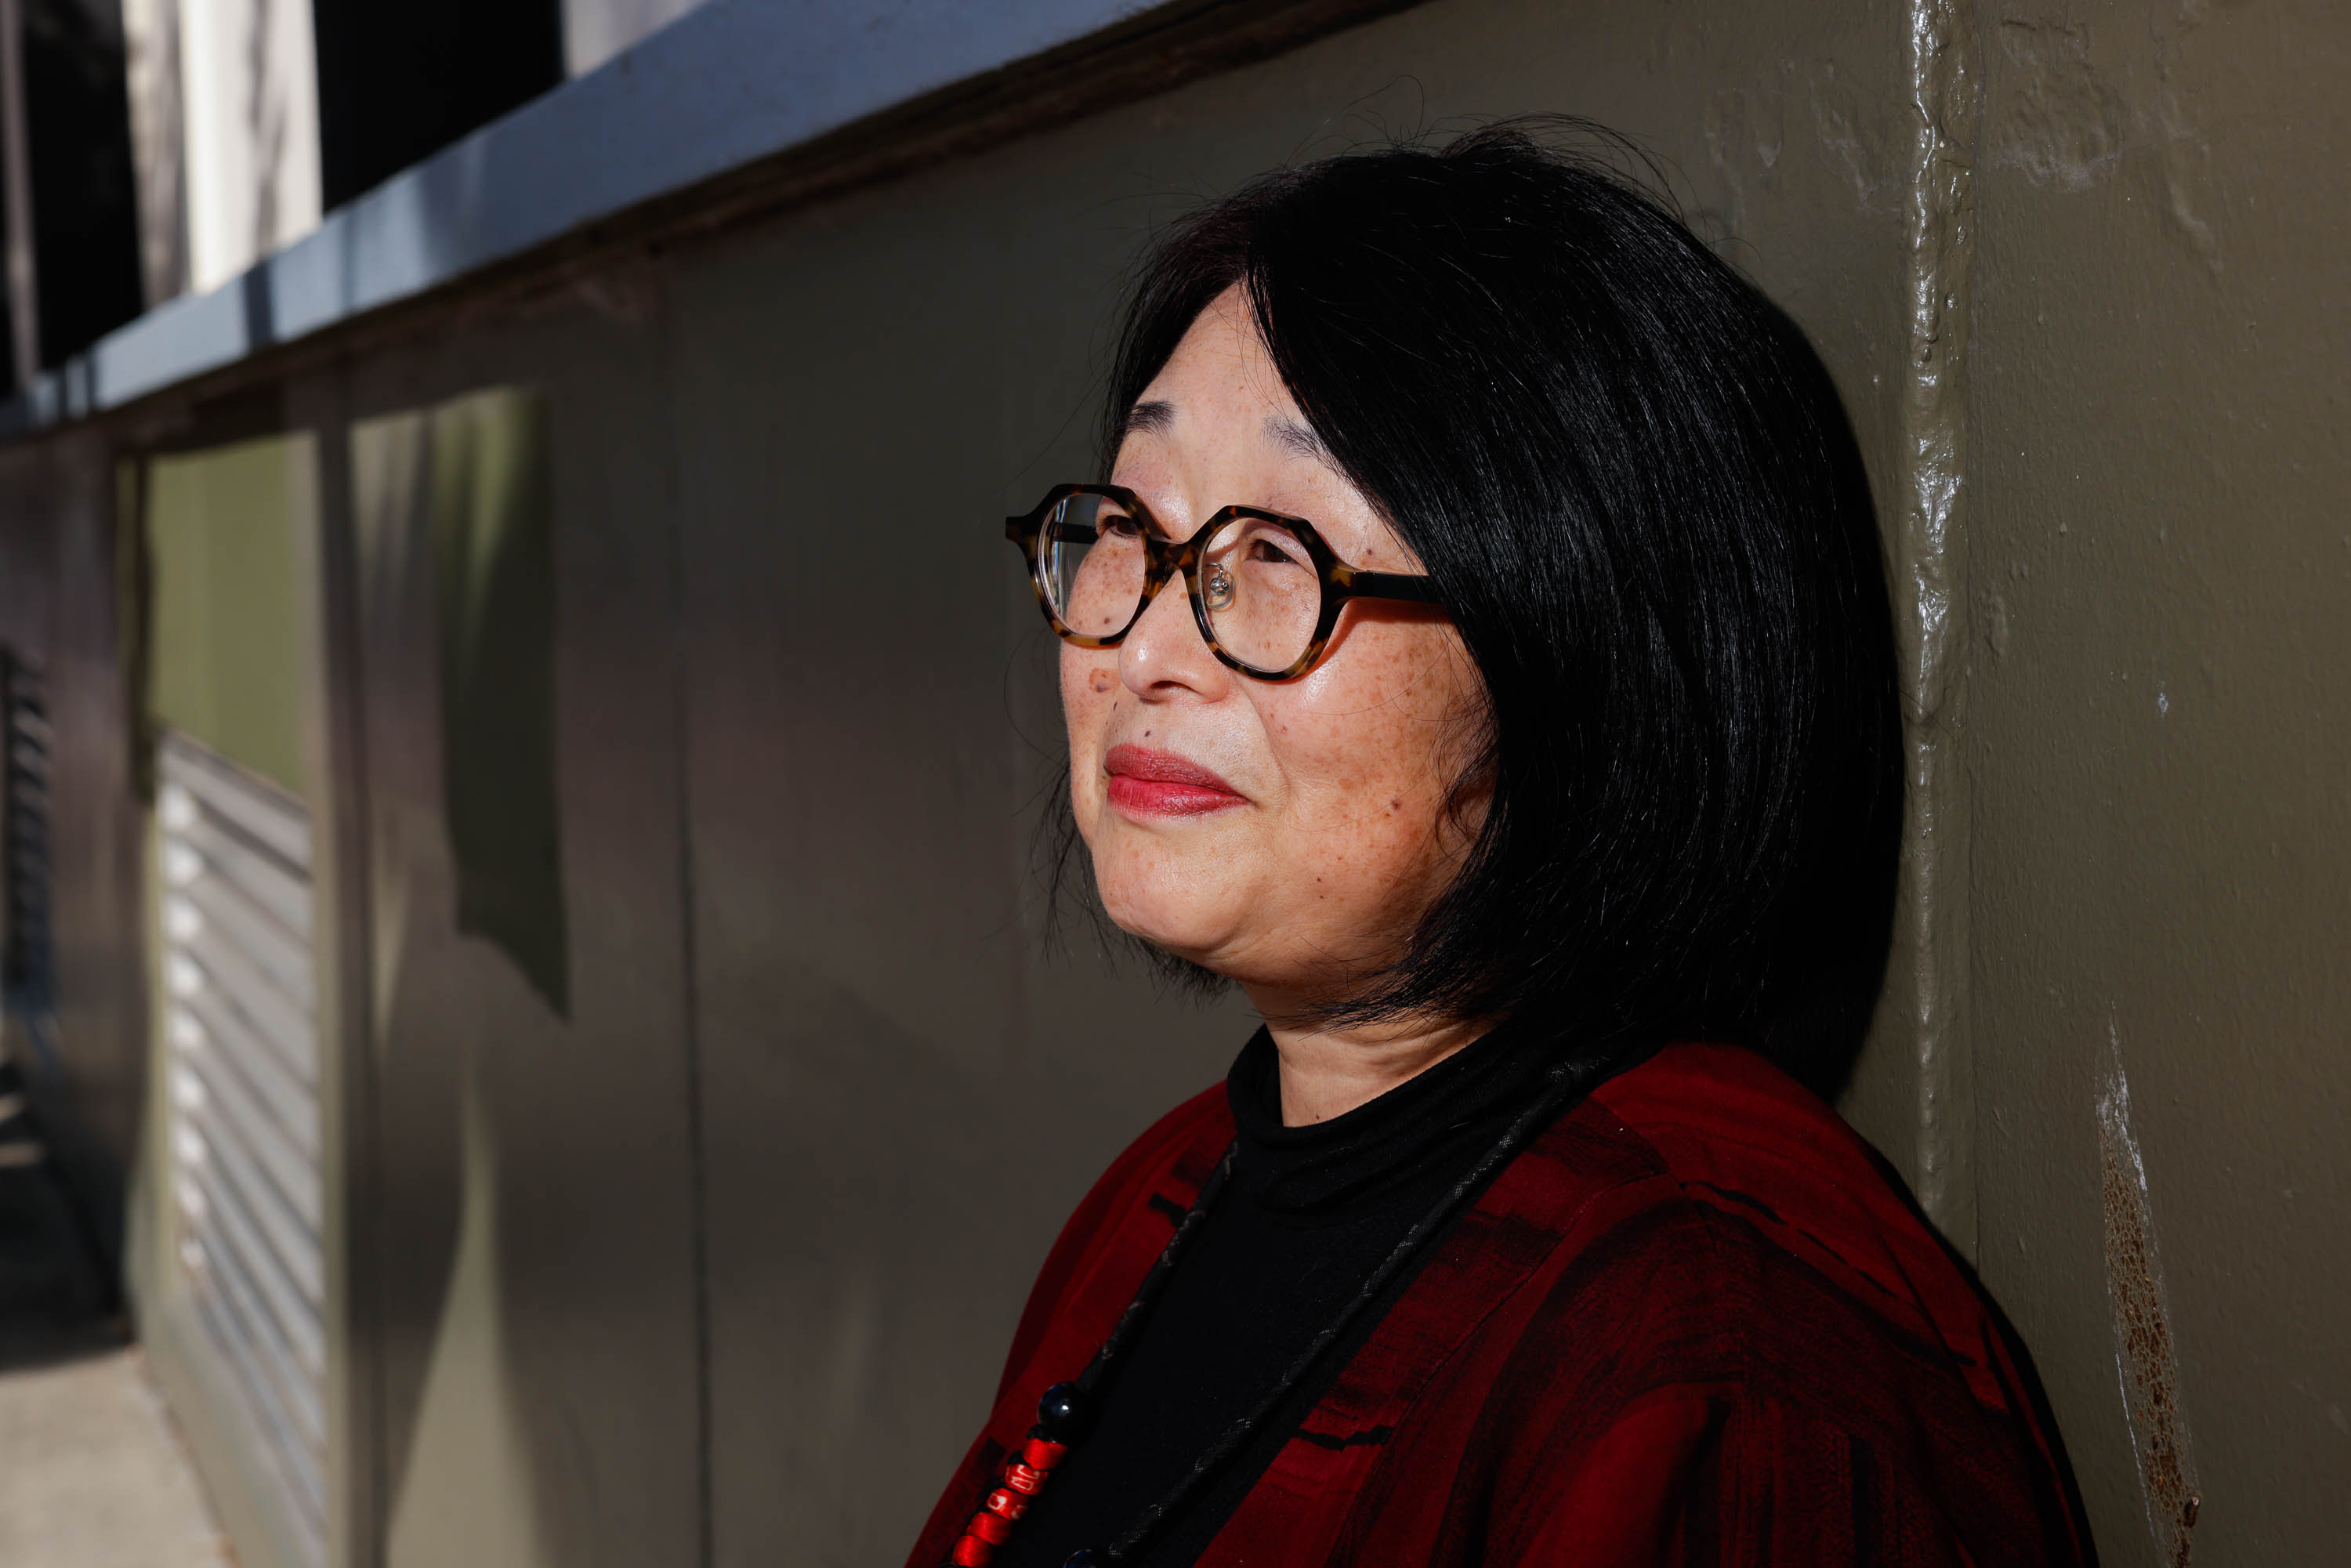 A woman with glasses and black hair gazes away from the camera, against a sunlit wall.